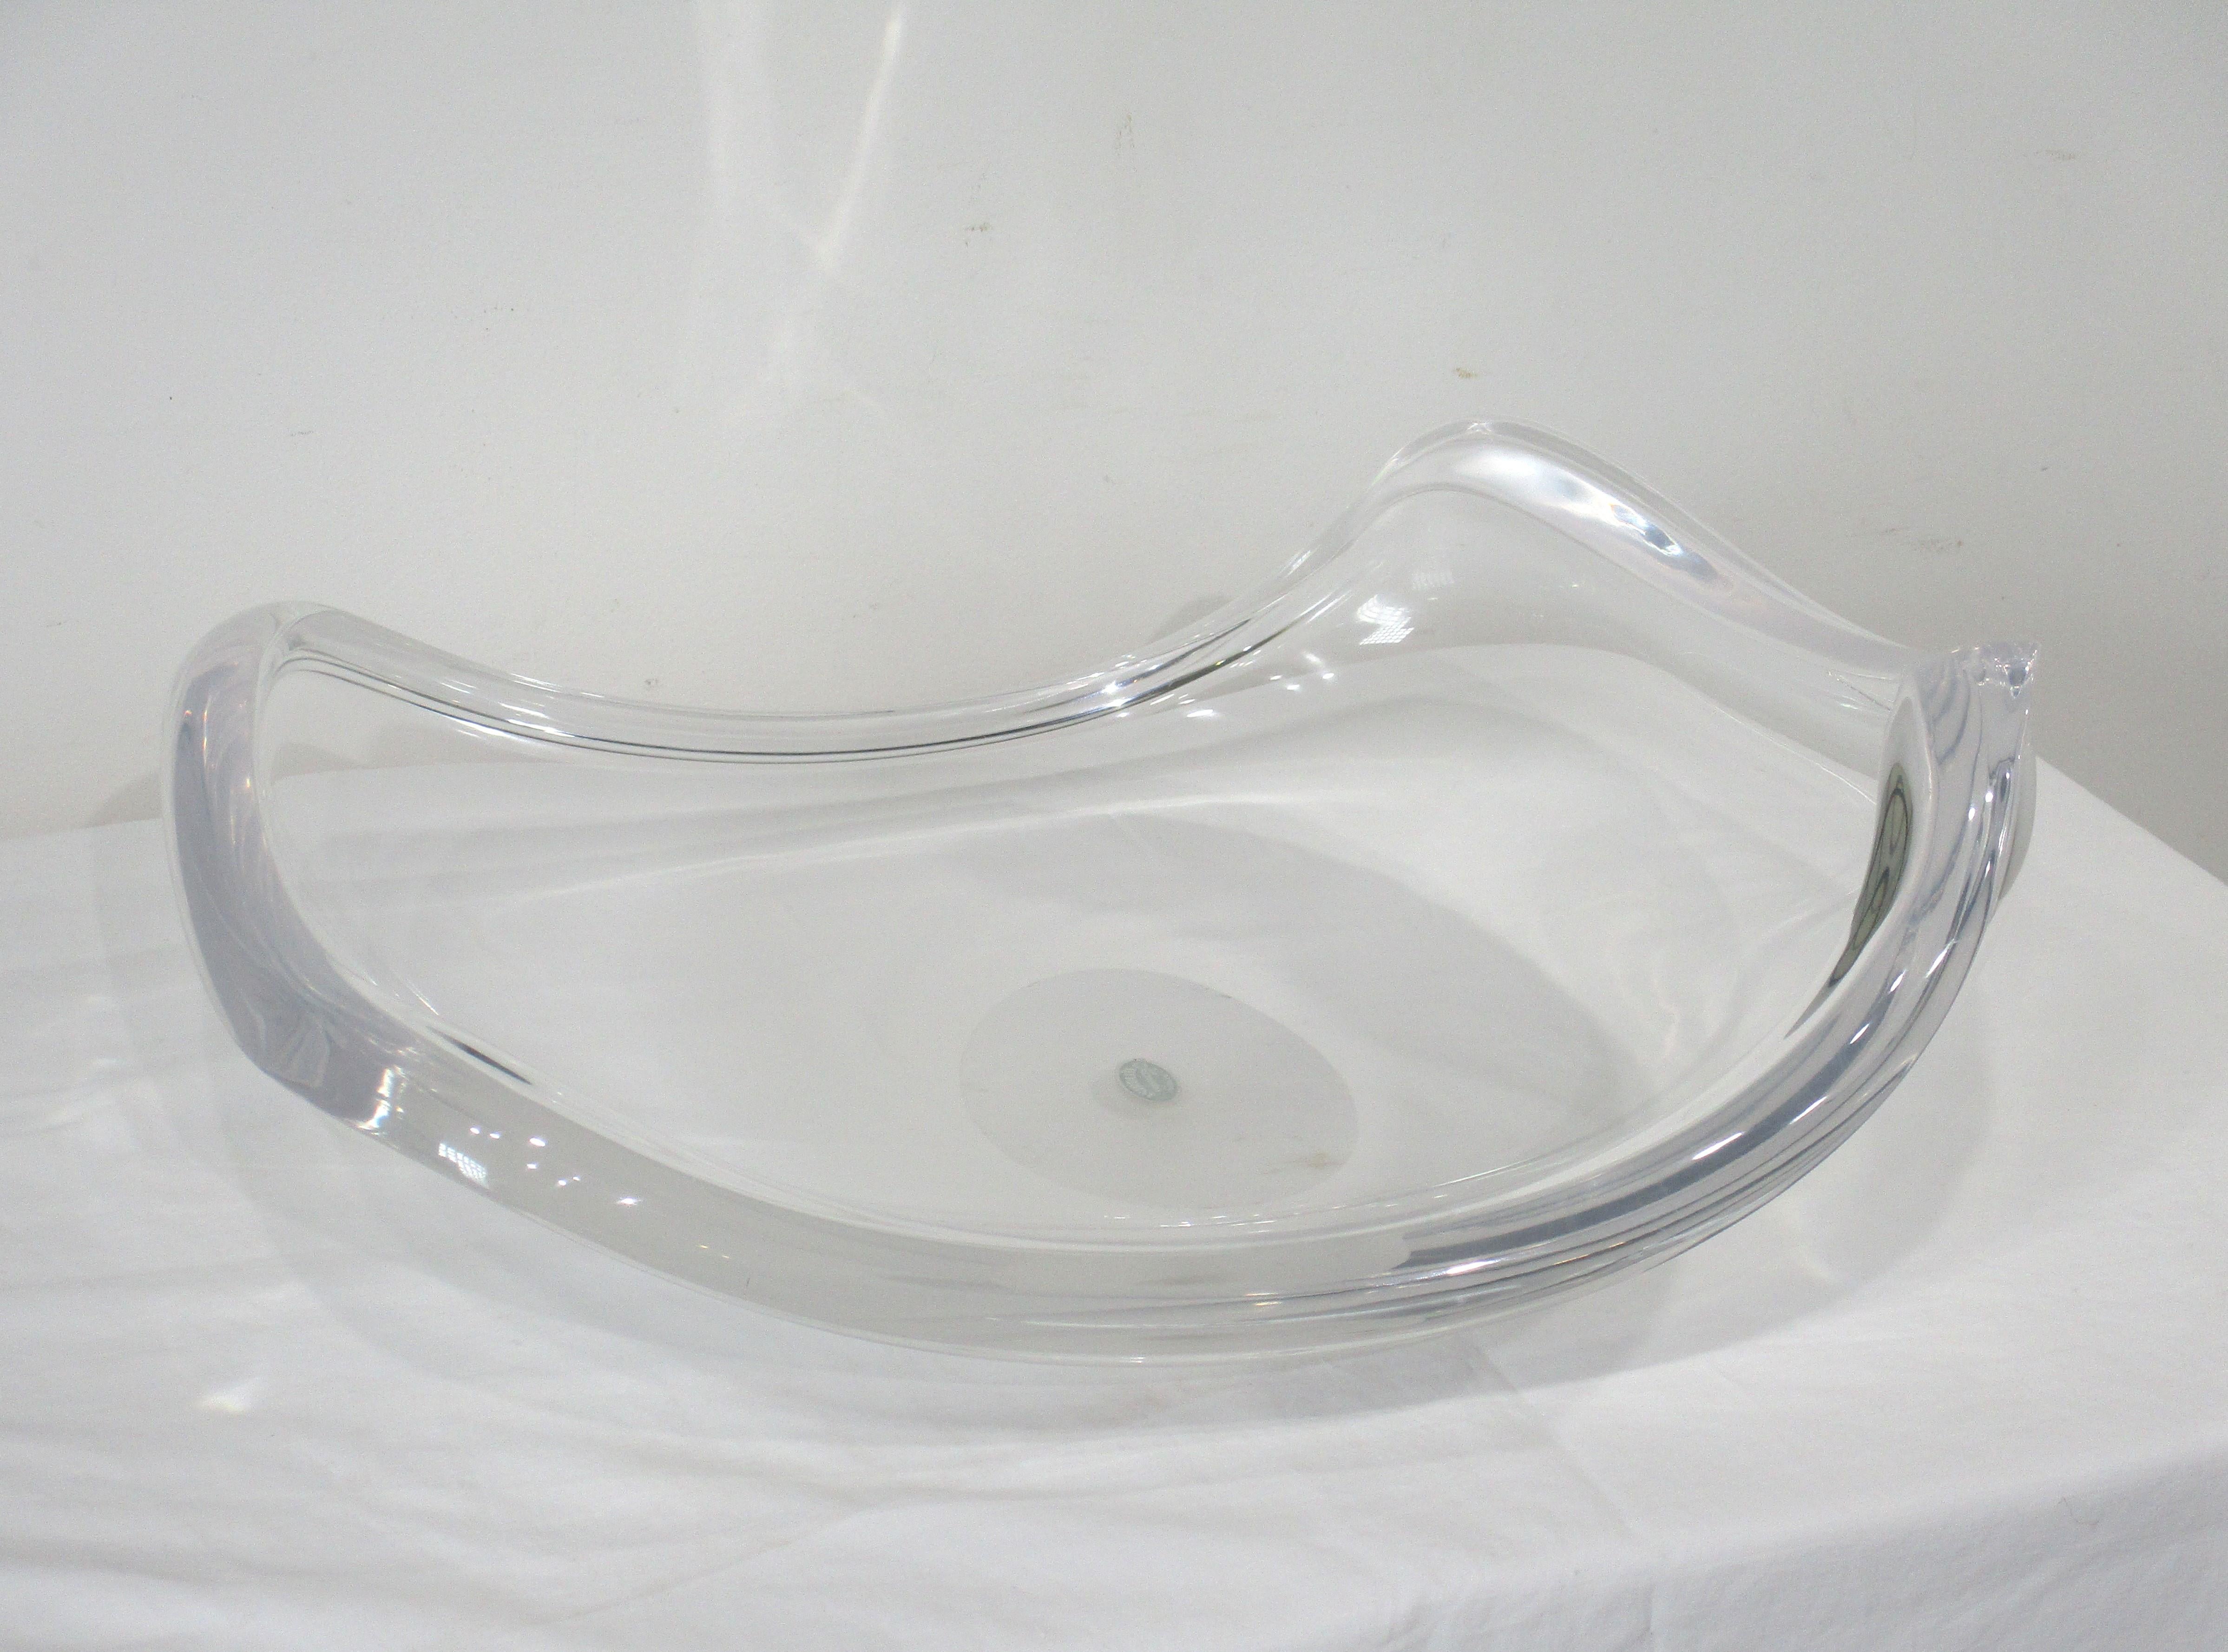 A large sized sculptural center piece bowl in thick Lucite with curved edges and upturned sides making this the perfect statement for any mid century table. Designed by Herb Ritts for the Astrolite company produced in the 1950's and still retains